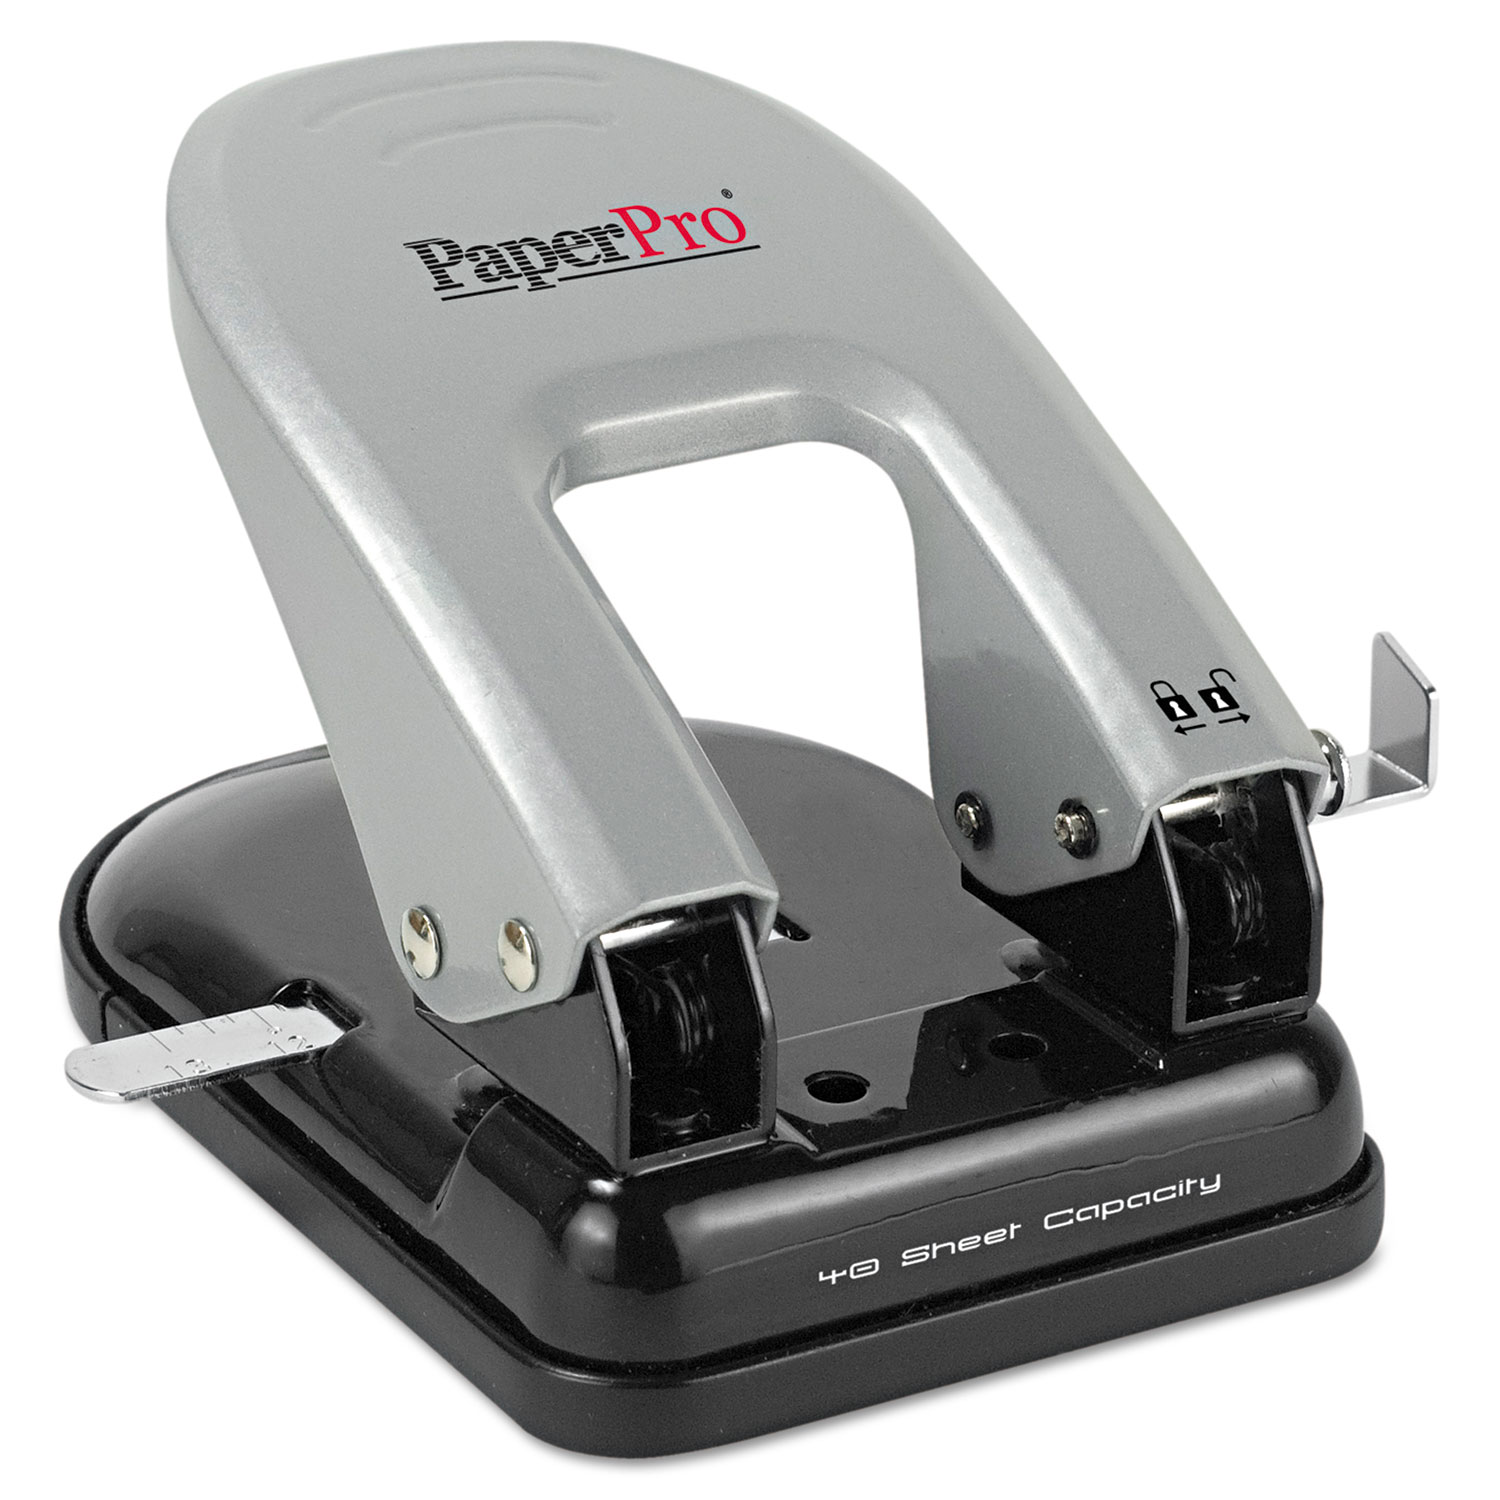 inDULGE Two-Hole Punch, 40-Sheet Capacity, Black/Silver